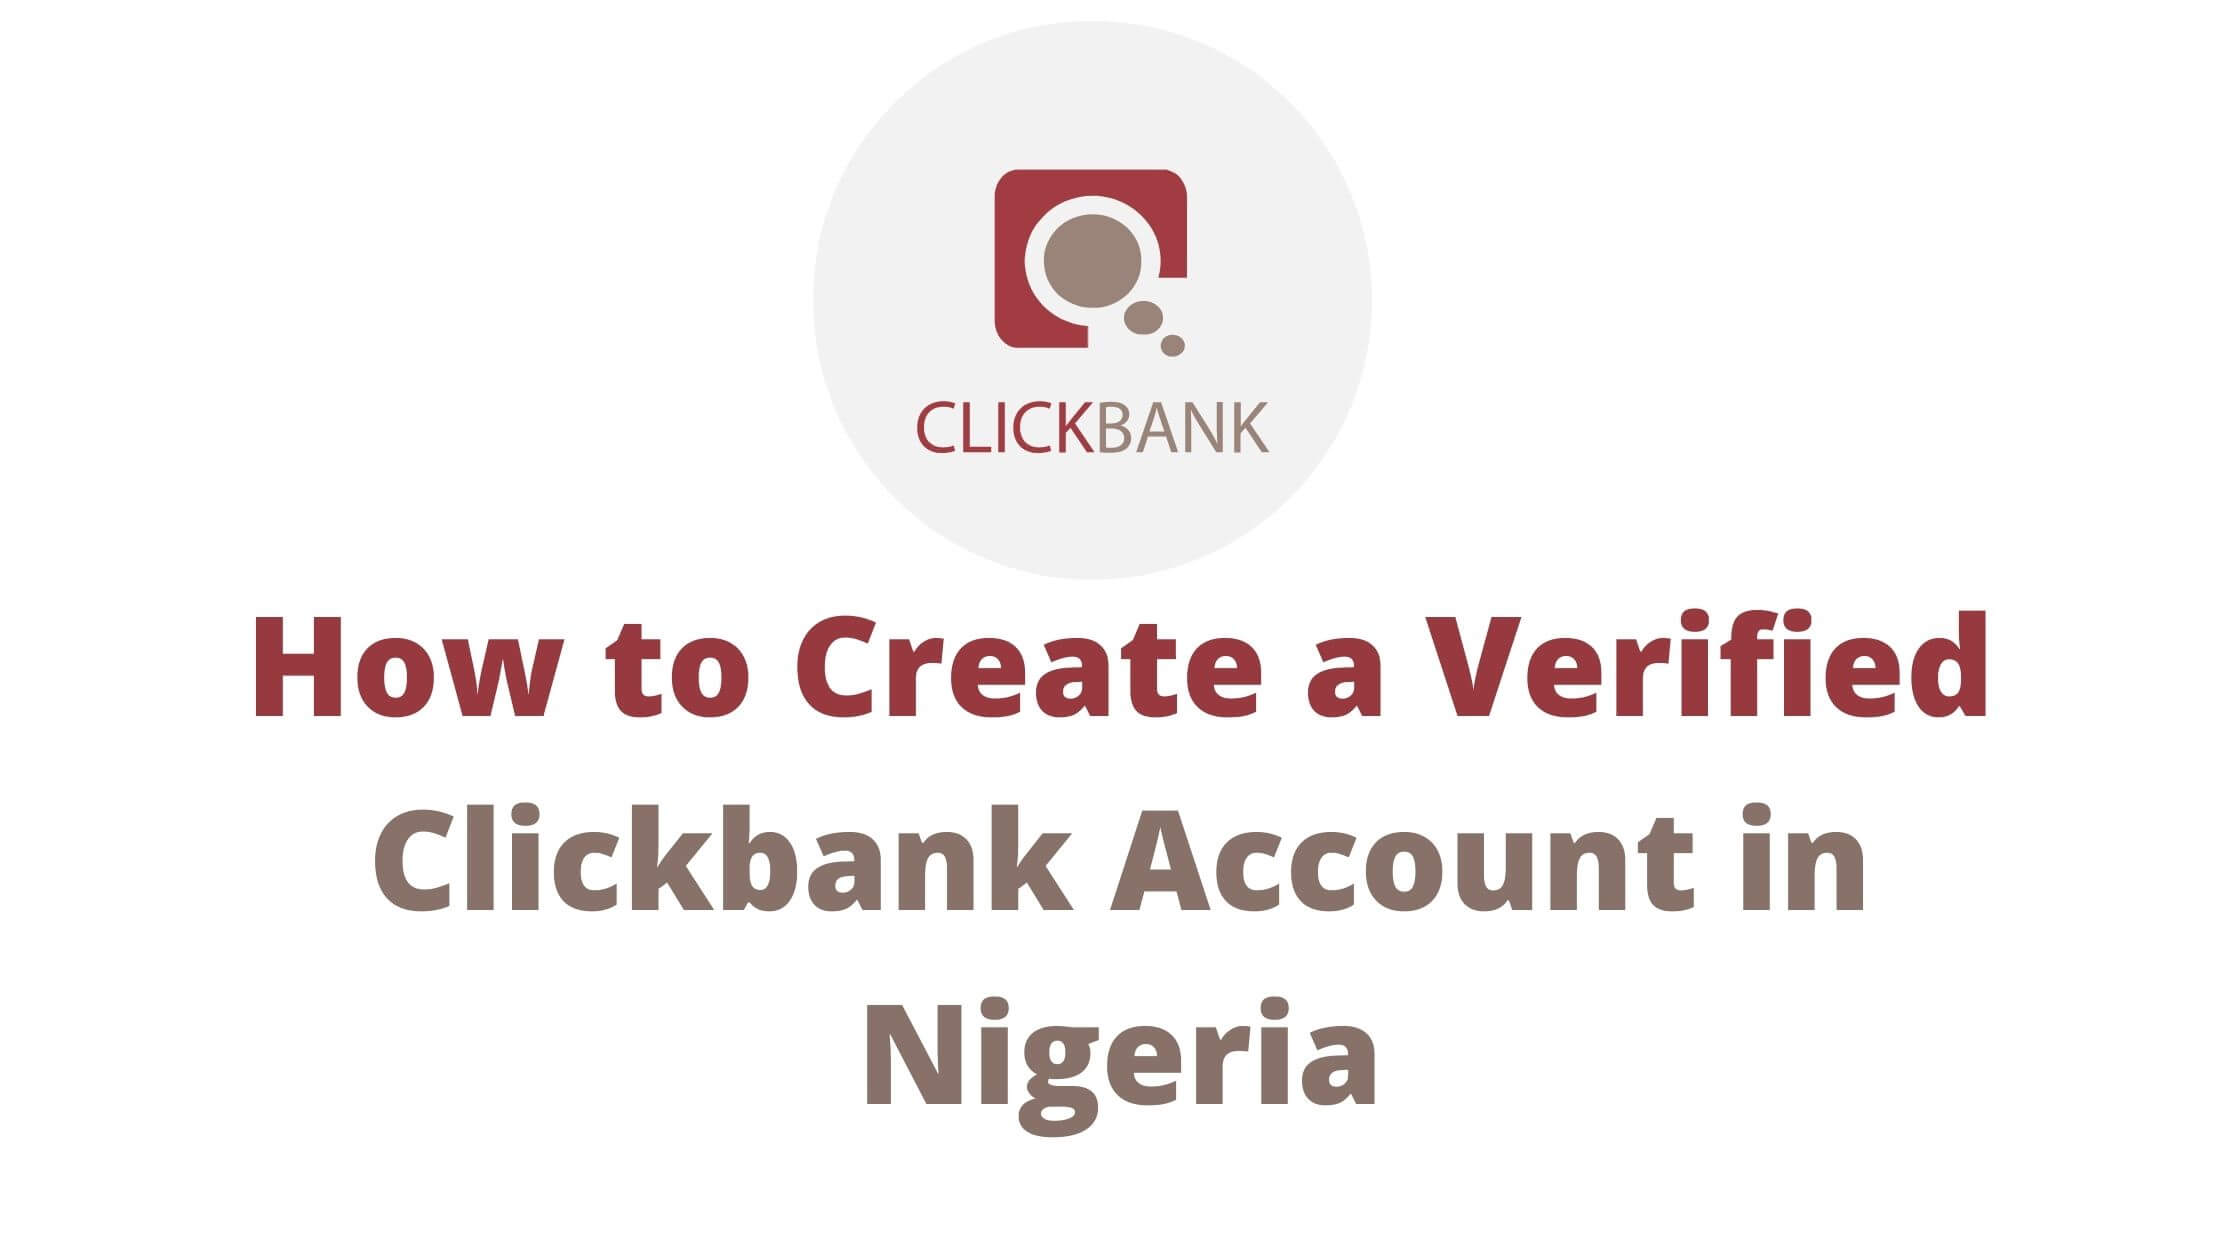 How to Create a Verified Clickbank Account in Nigeria